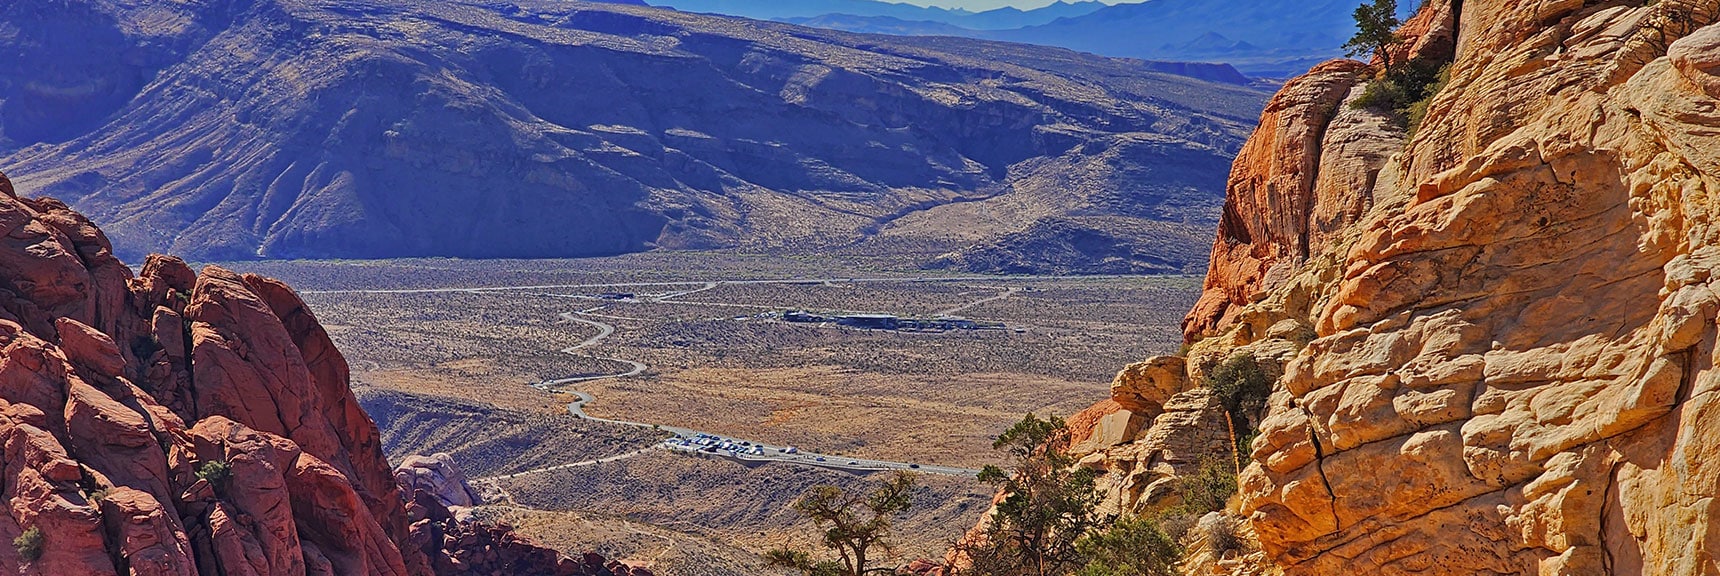 View Down into Red Rock Canyon. Scenic Drive Parking #2, Visitor Center and Blue Diamond Mt. | Calico Tanks | Red Rock Canyon National Conservation Area, Nevada